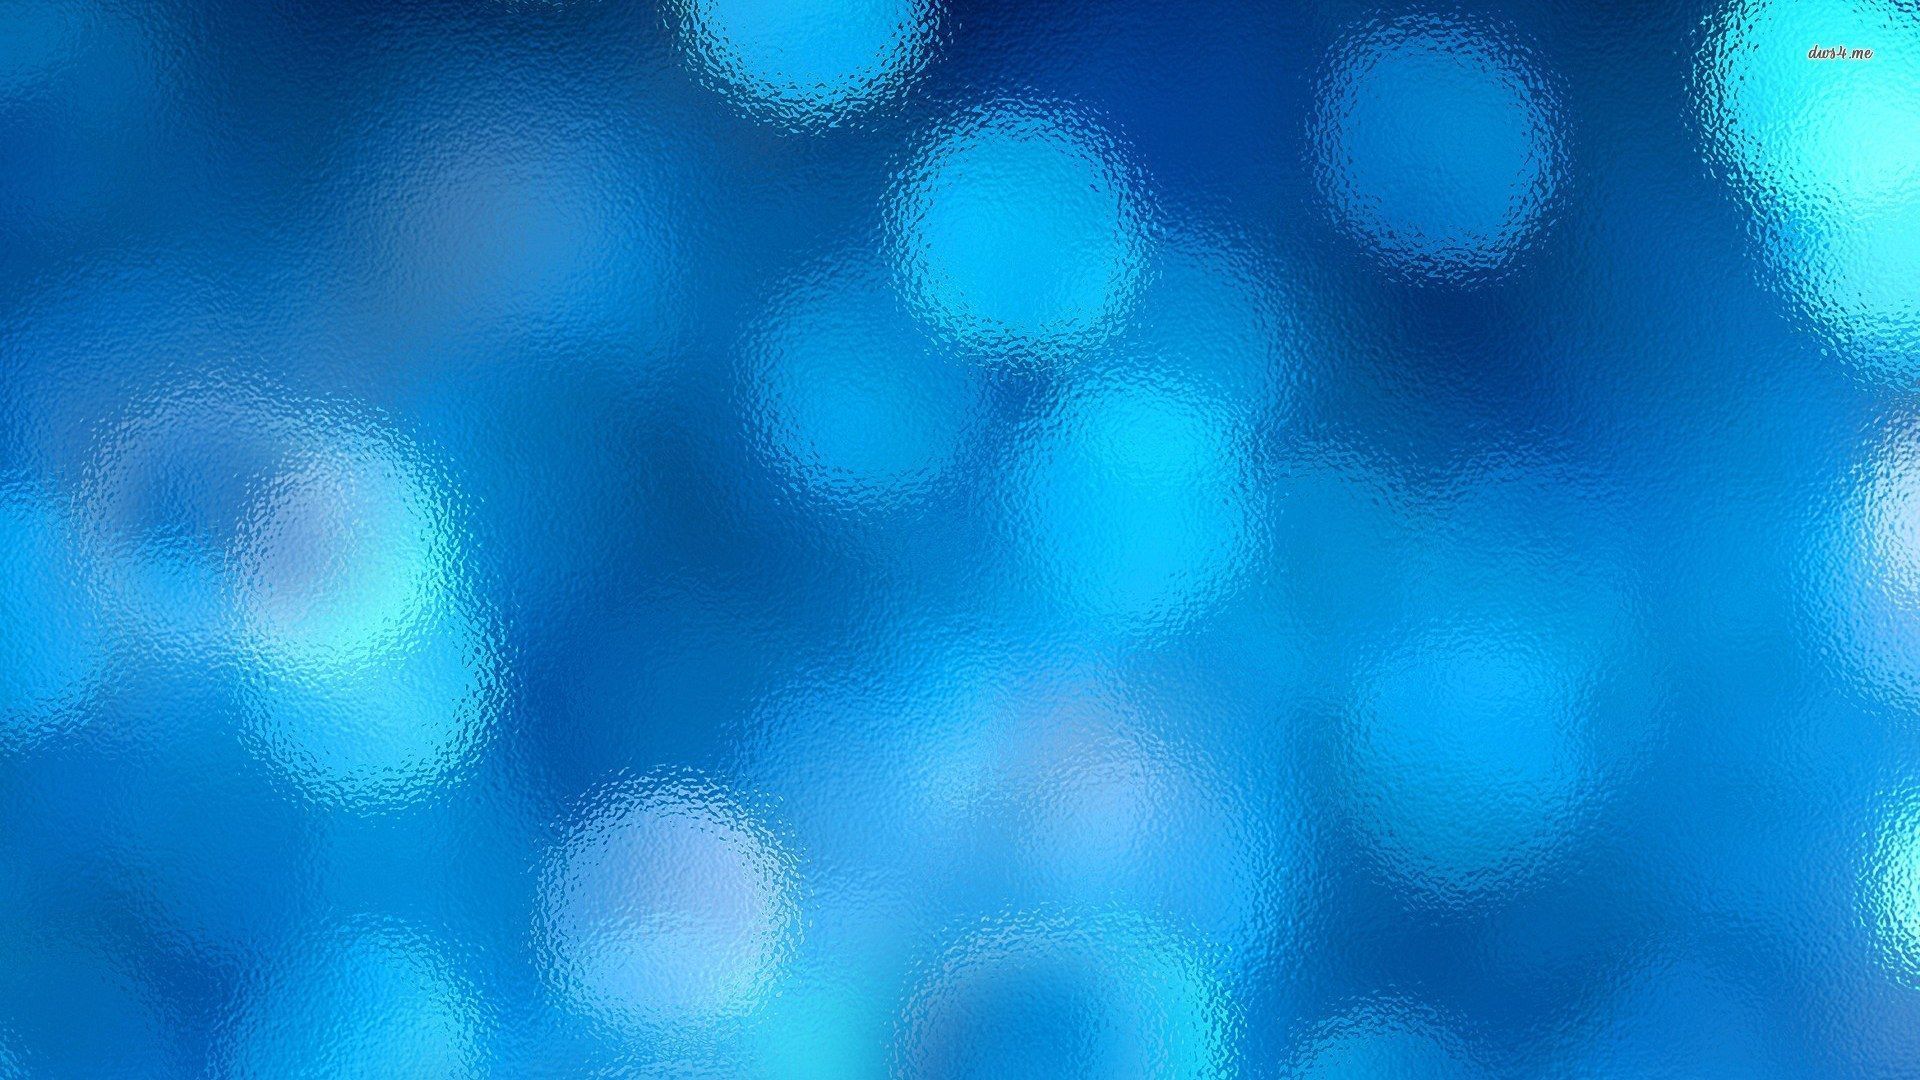 Blue Glass Bubbles wallpaper - Abstract wallpapers - #3191